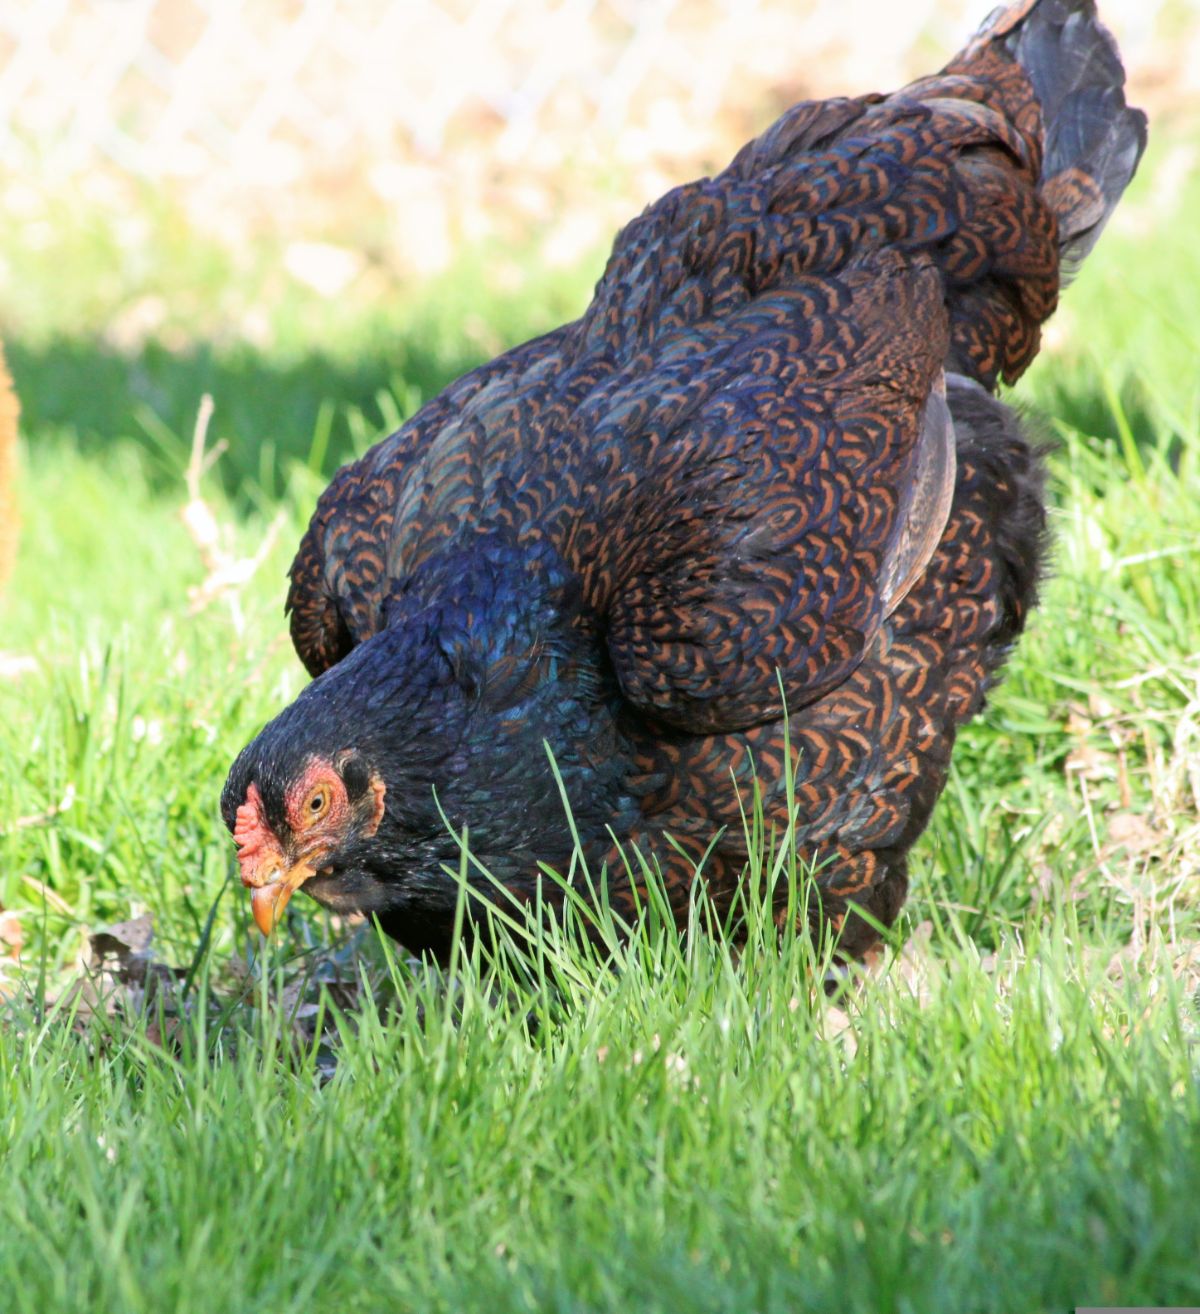 A beautiful Cornish Chicken looking for food in green grass.